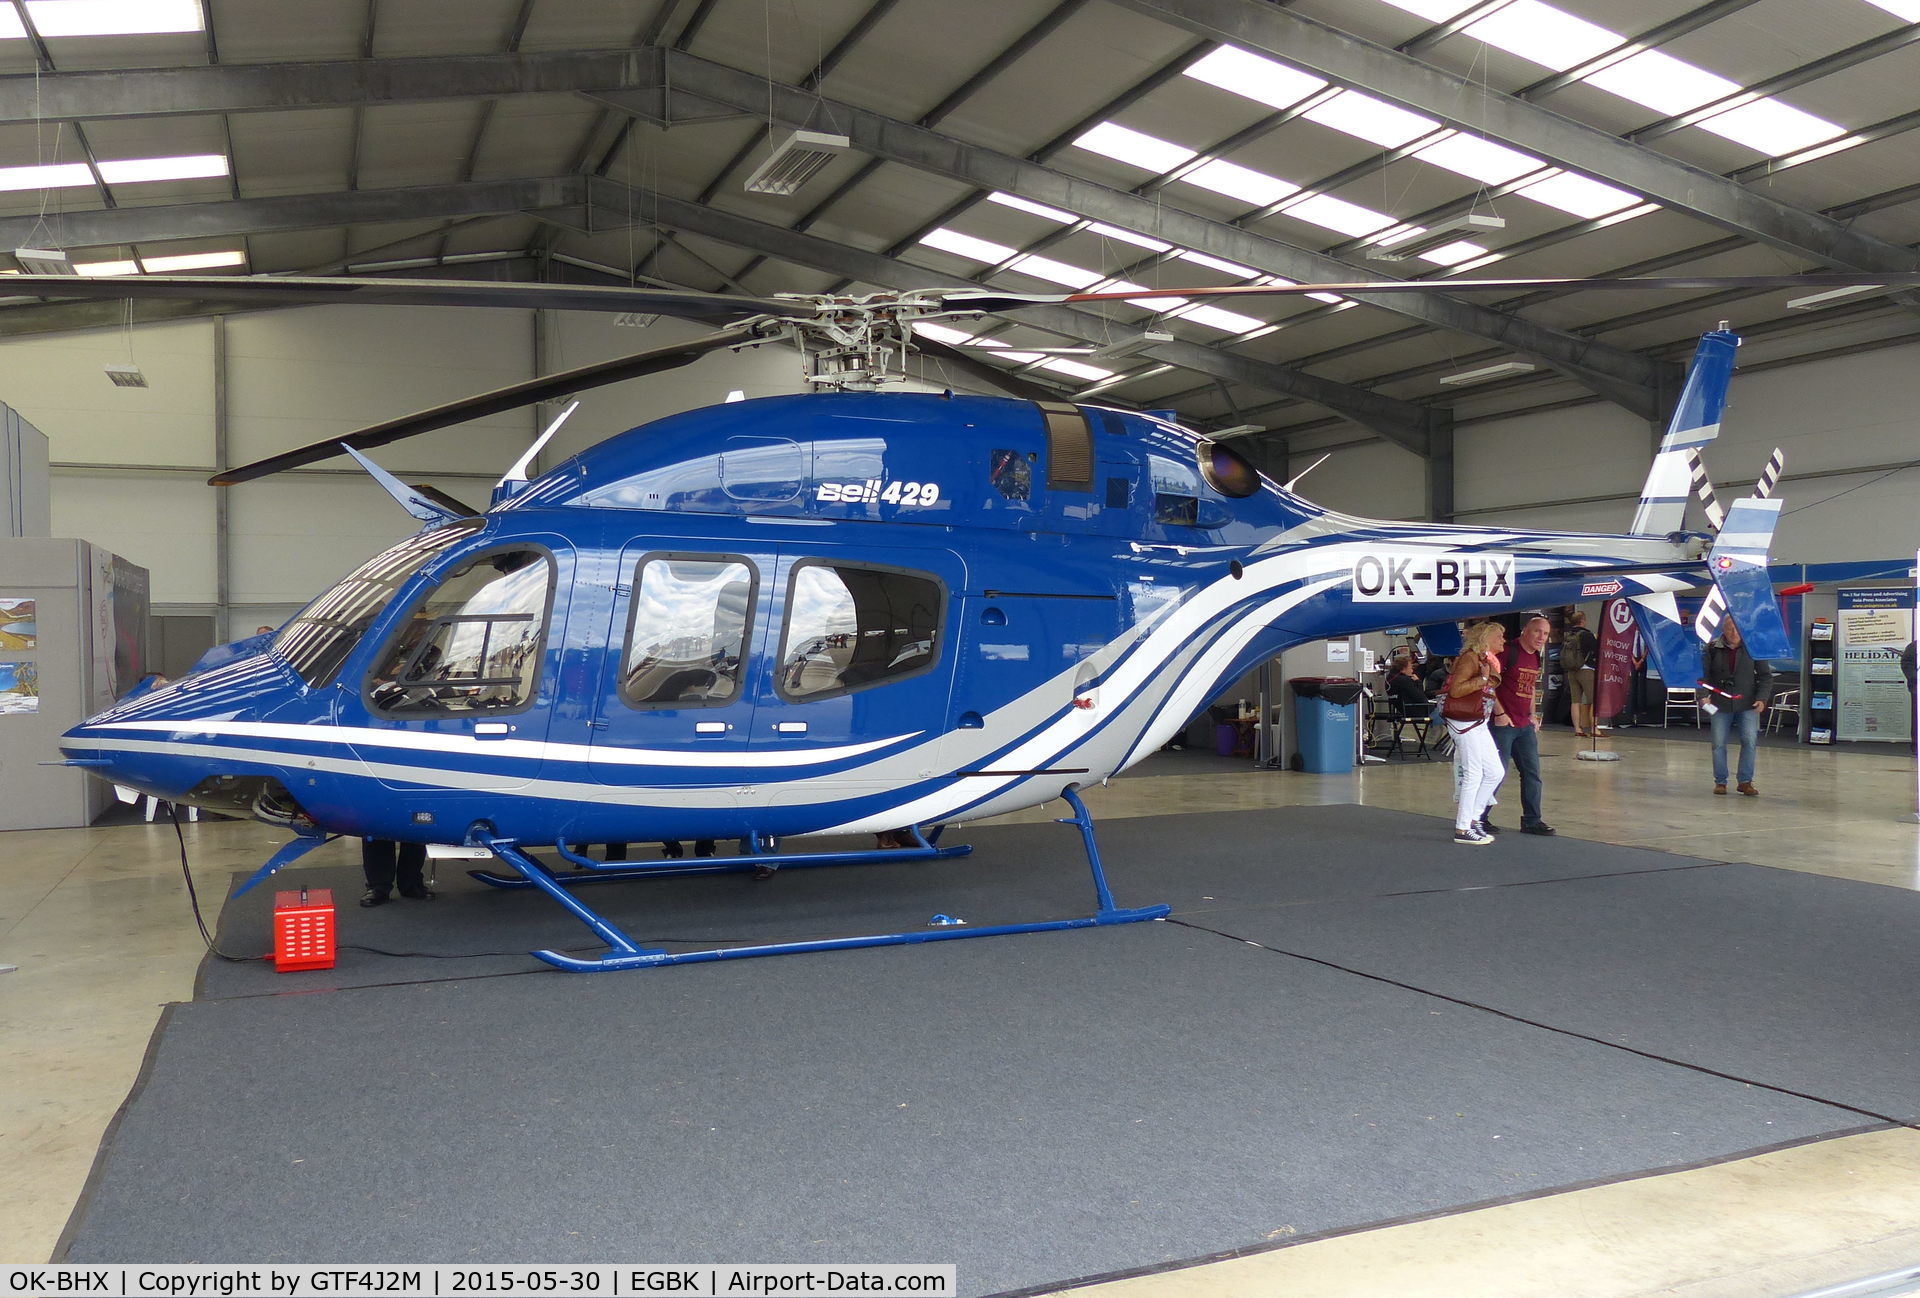 OK-BHX, 2014 Bell 429 GlobalRanger C/N 57224, OH-BHX at Heli Expo Sywell 30.5.15 (2nd use of these marks on  Bell 429)